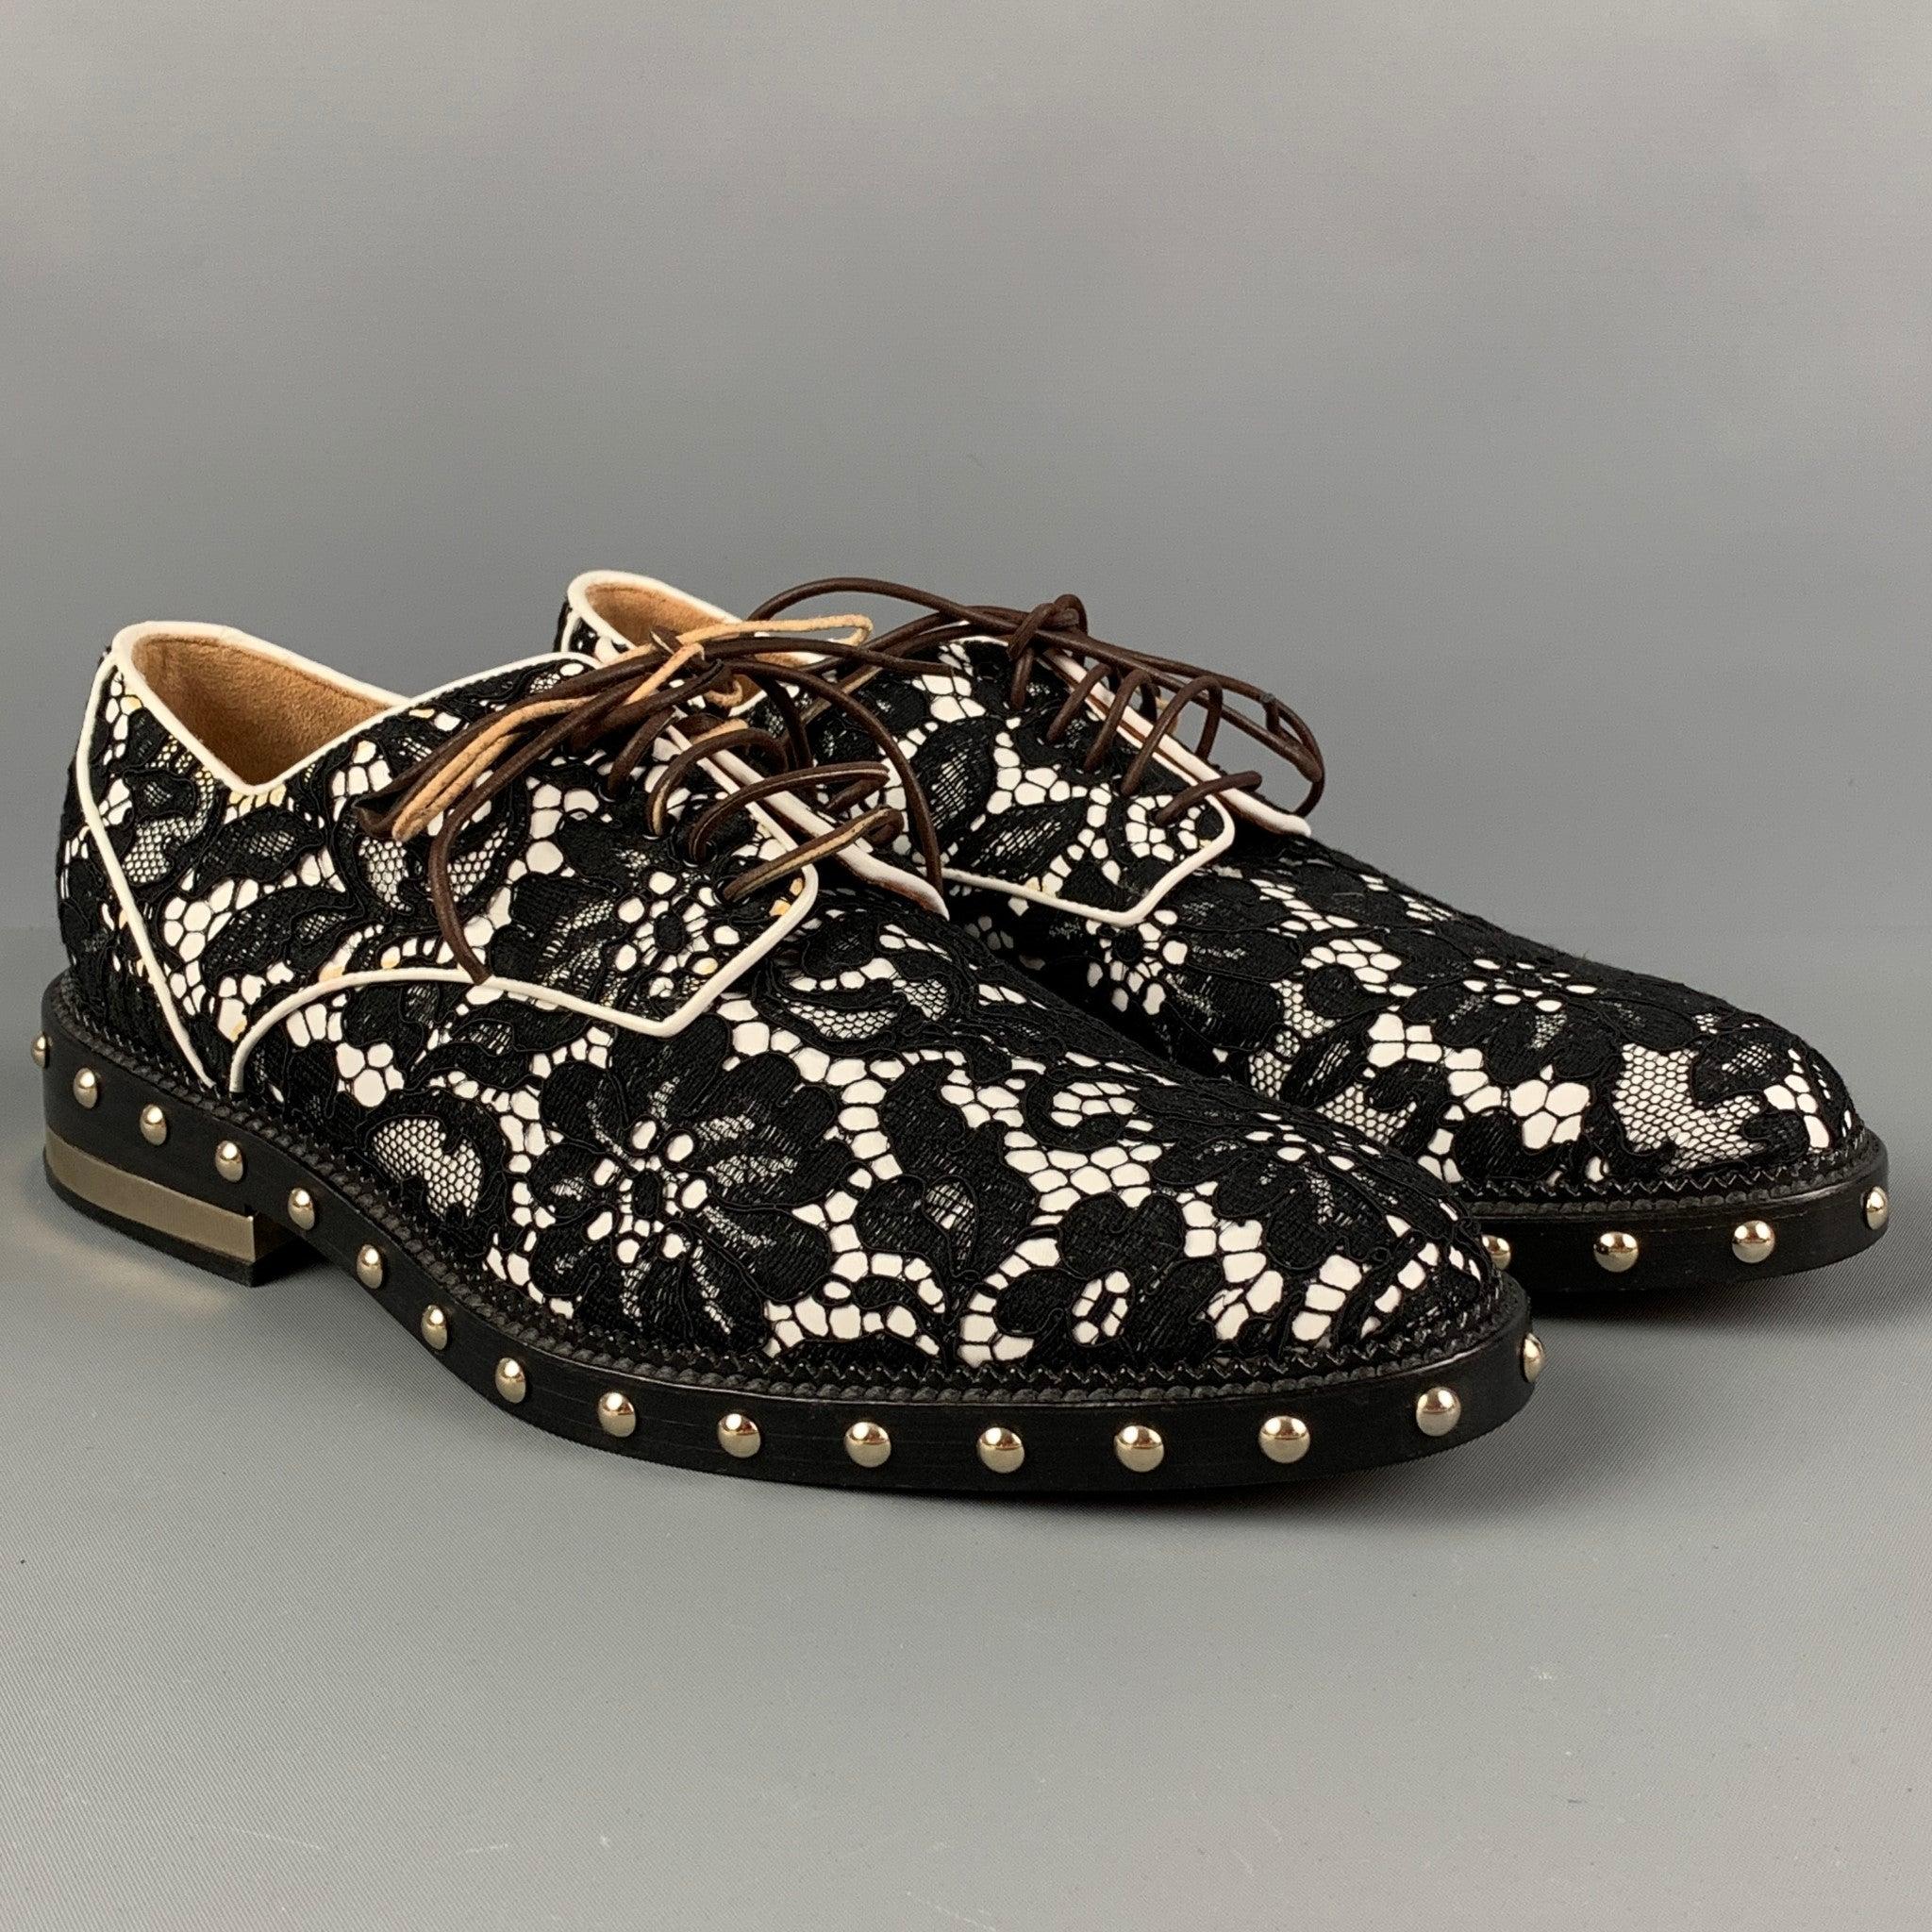 GIVENCHY shoes comes in a black & white lace material featuring studded details, gold tone hardware, round toe, and a leather lace up closure. Made in Italy.
Good Pre-Owned Condition. Moderate wear at laces. As-Is.  

Marked:   36.5Outsole: 10.75